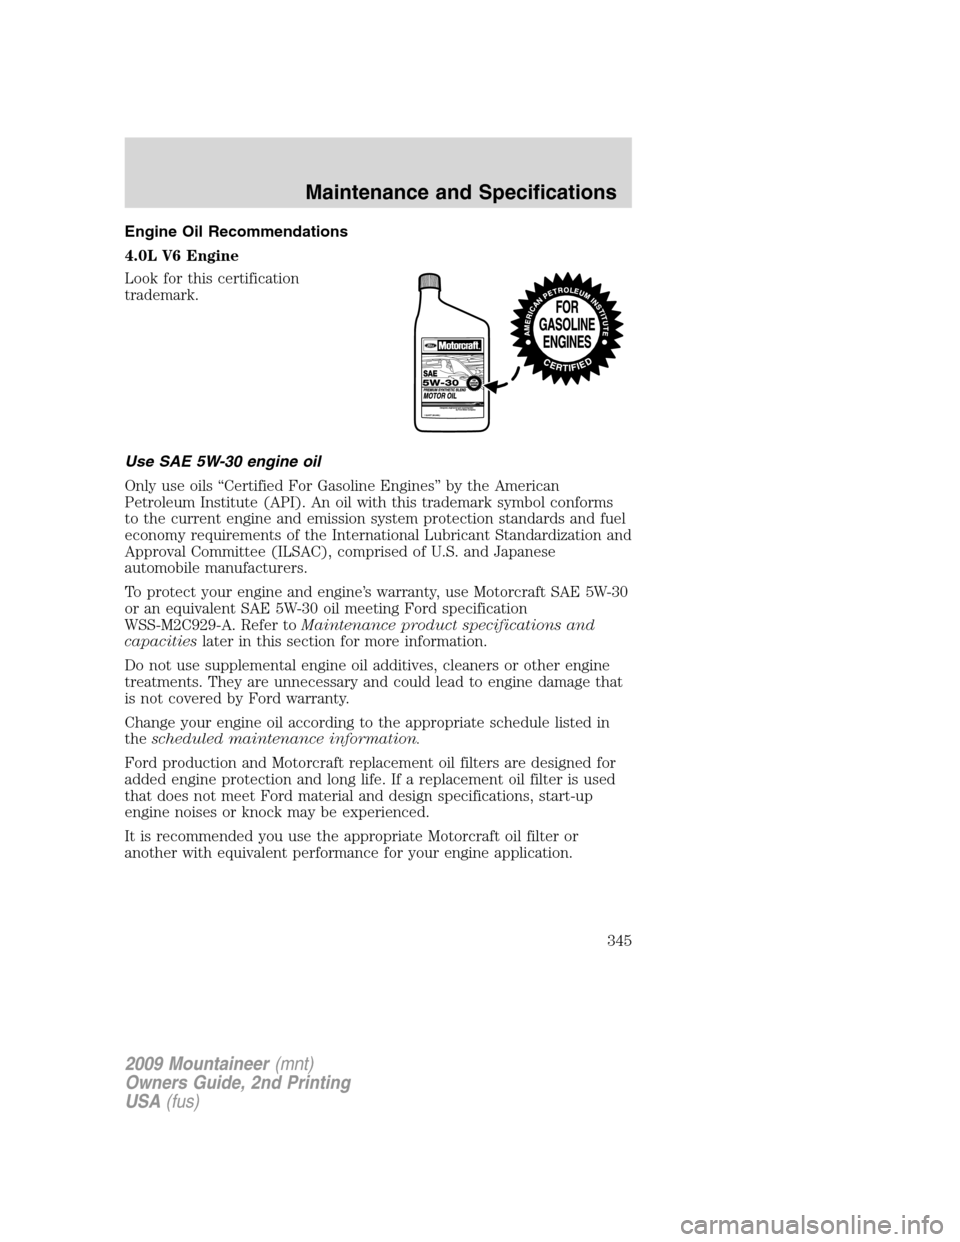 Mercury Mountaineer 2009  Owners Manuals Engine Oil Recommendations
4.0L V6 Engine
Look for this certification
trademark.
Use SAE 5W-30 engine oil
Only use oils “Certified For Gasoline Engines” by the American
Petroleum Institute (API). 